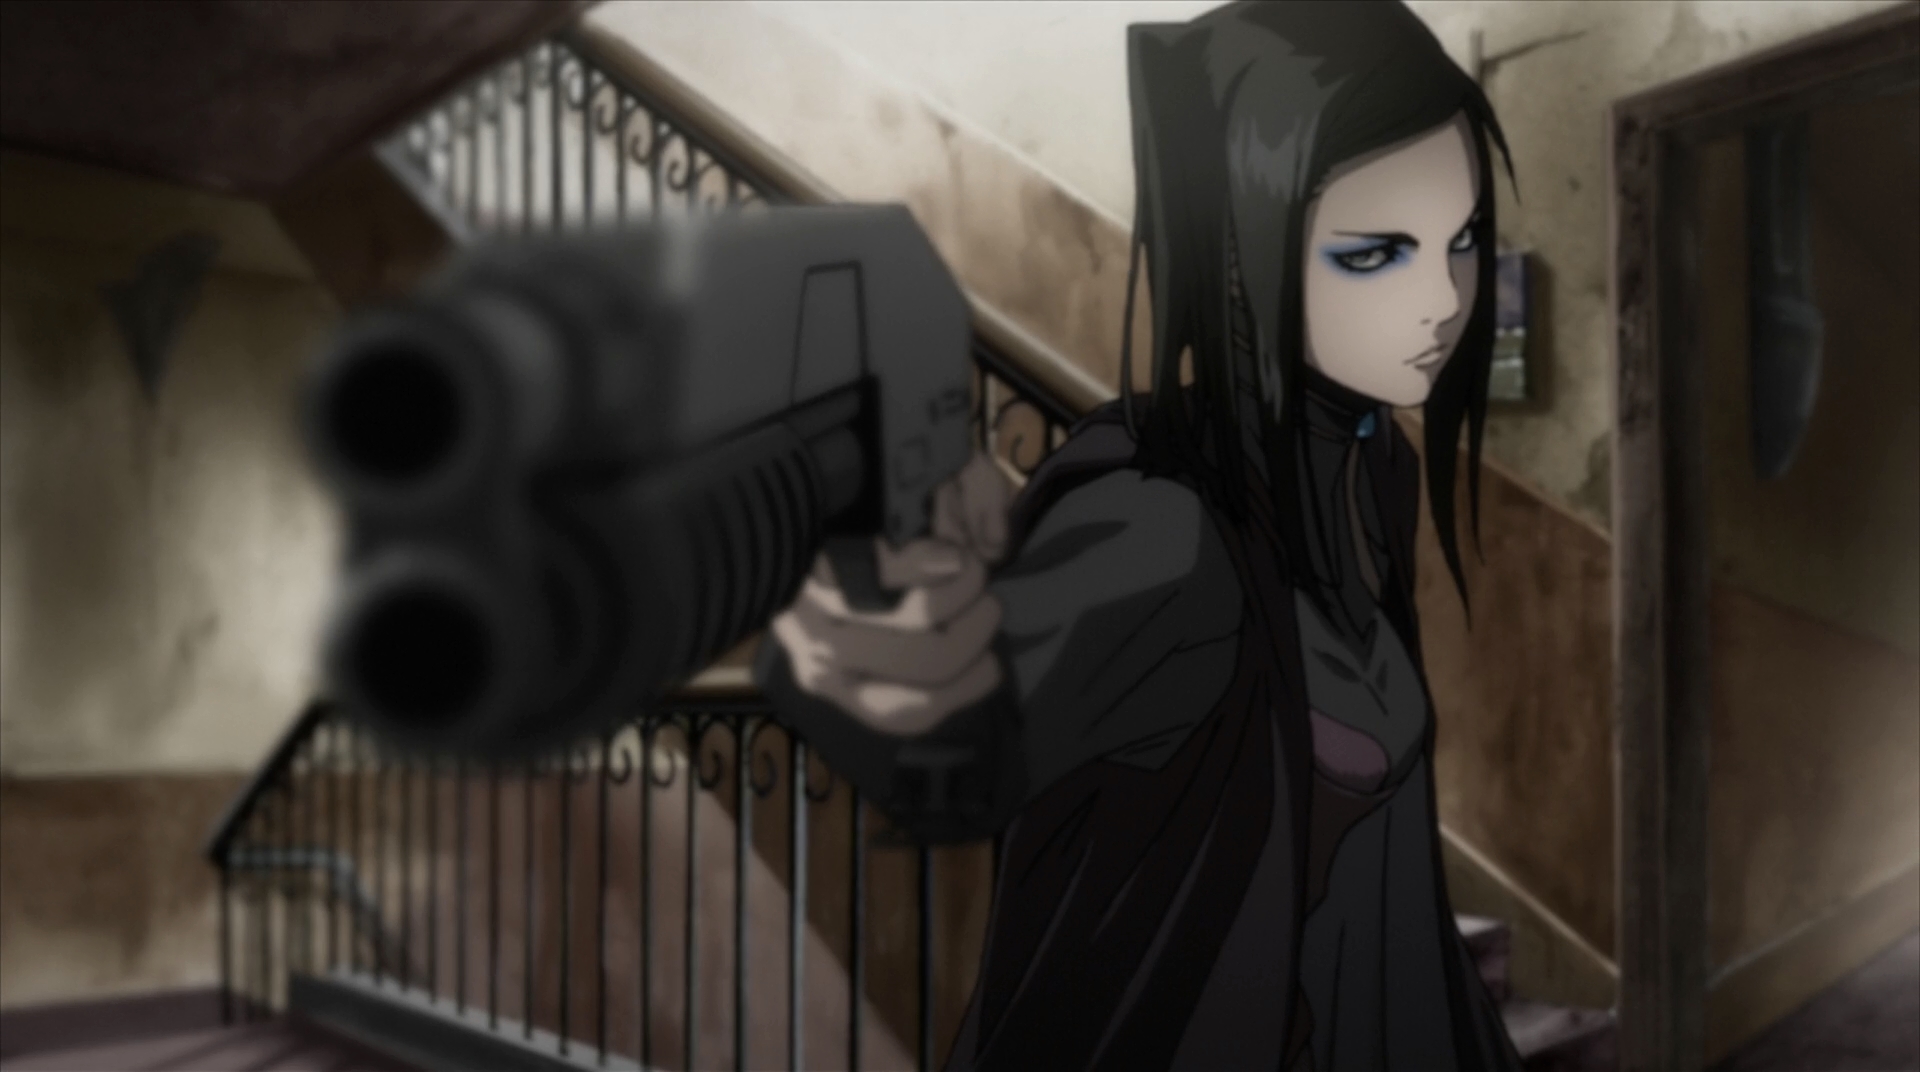 Thoughtful Thursday Humancentric Views and Solipsism in Ergo Proxy  Anime  Rants